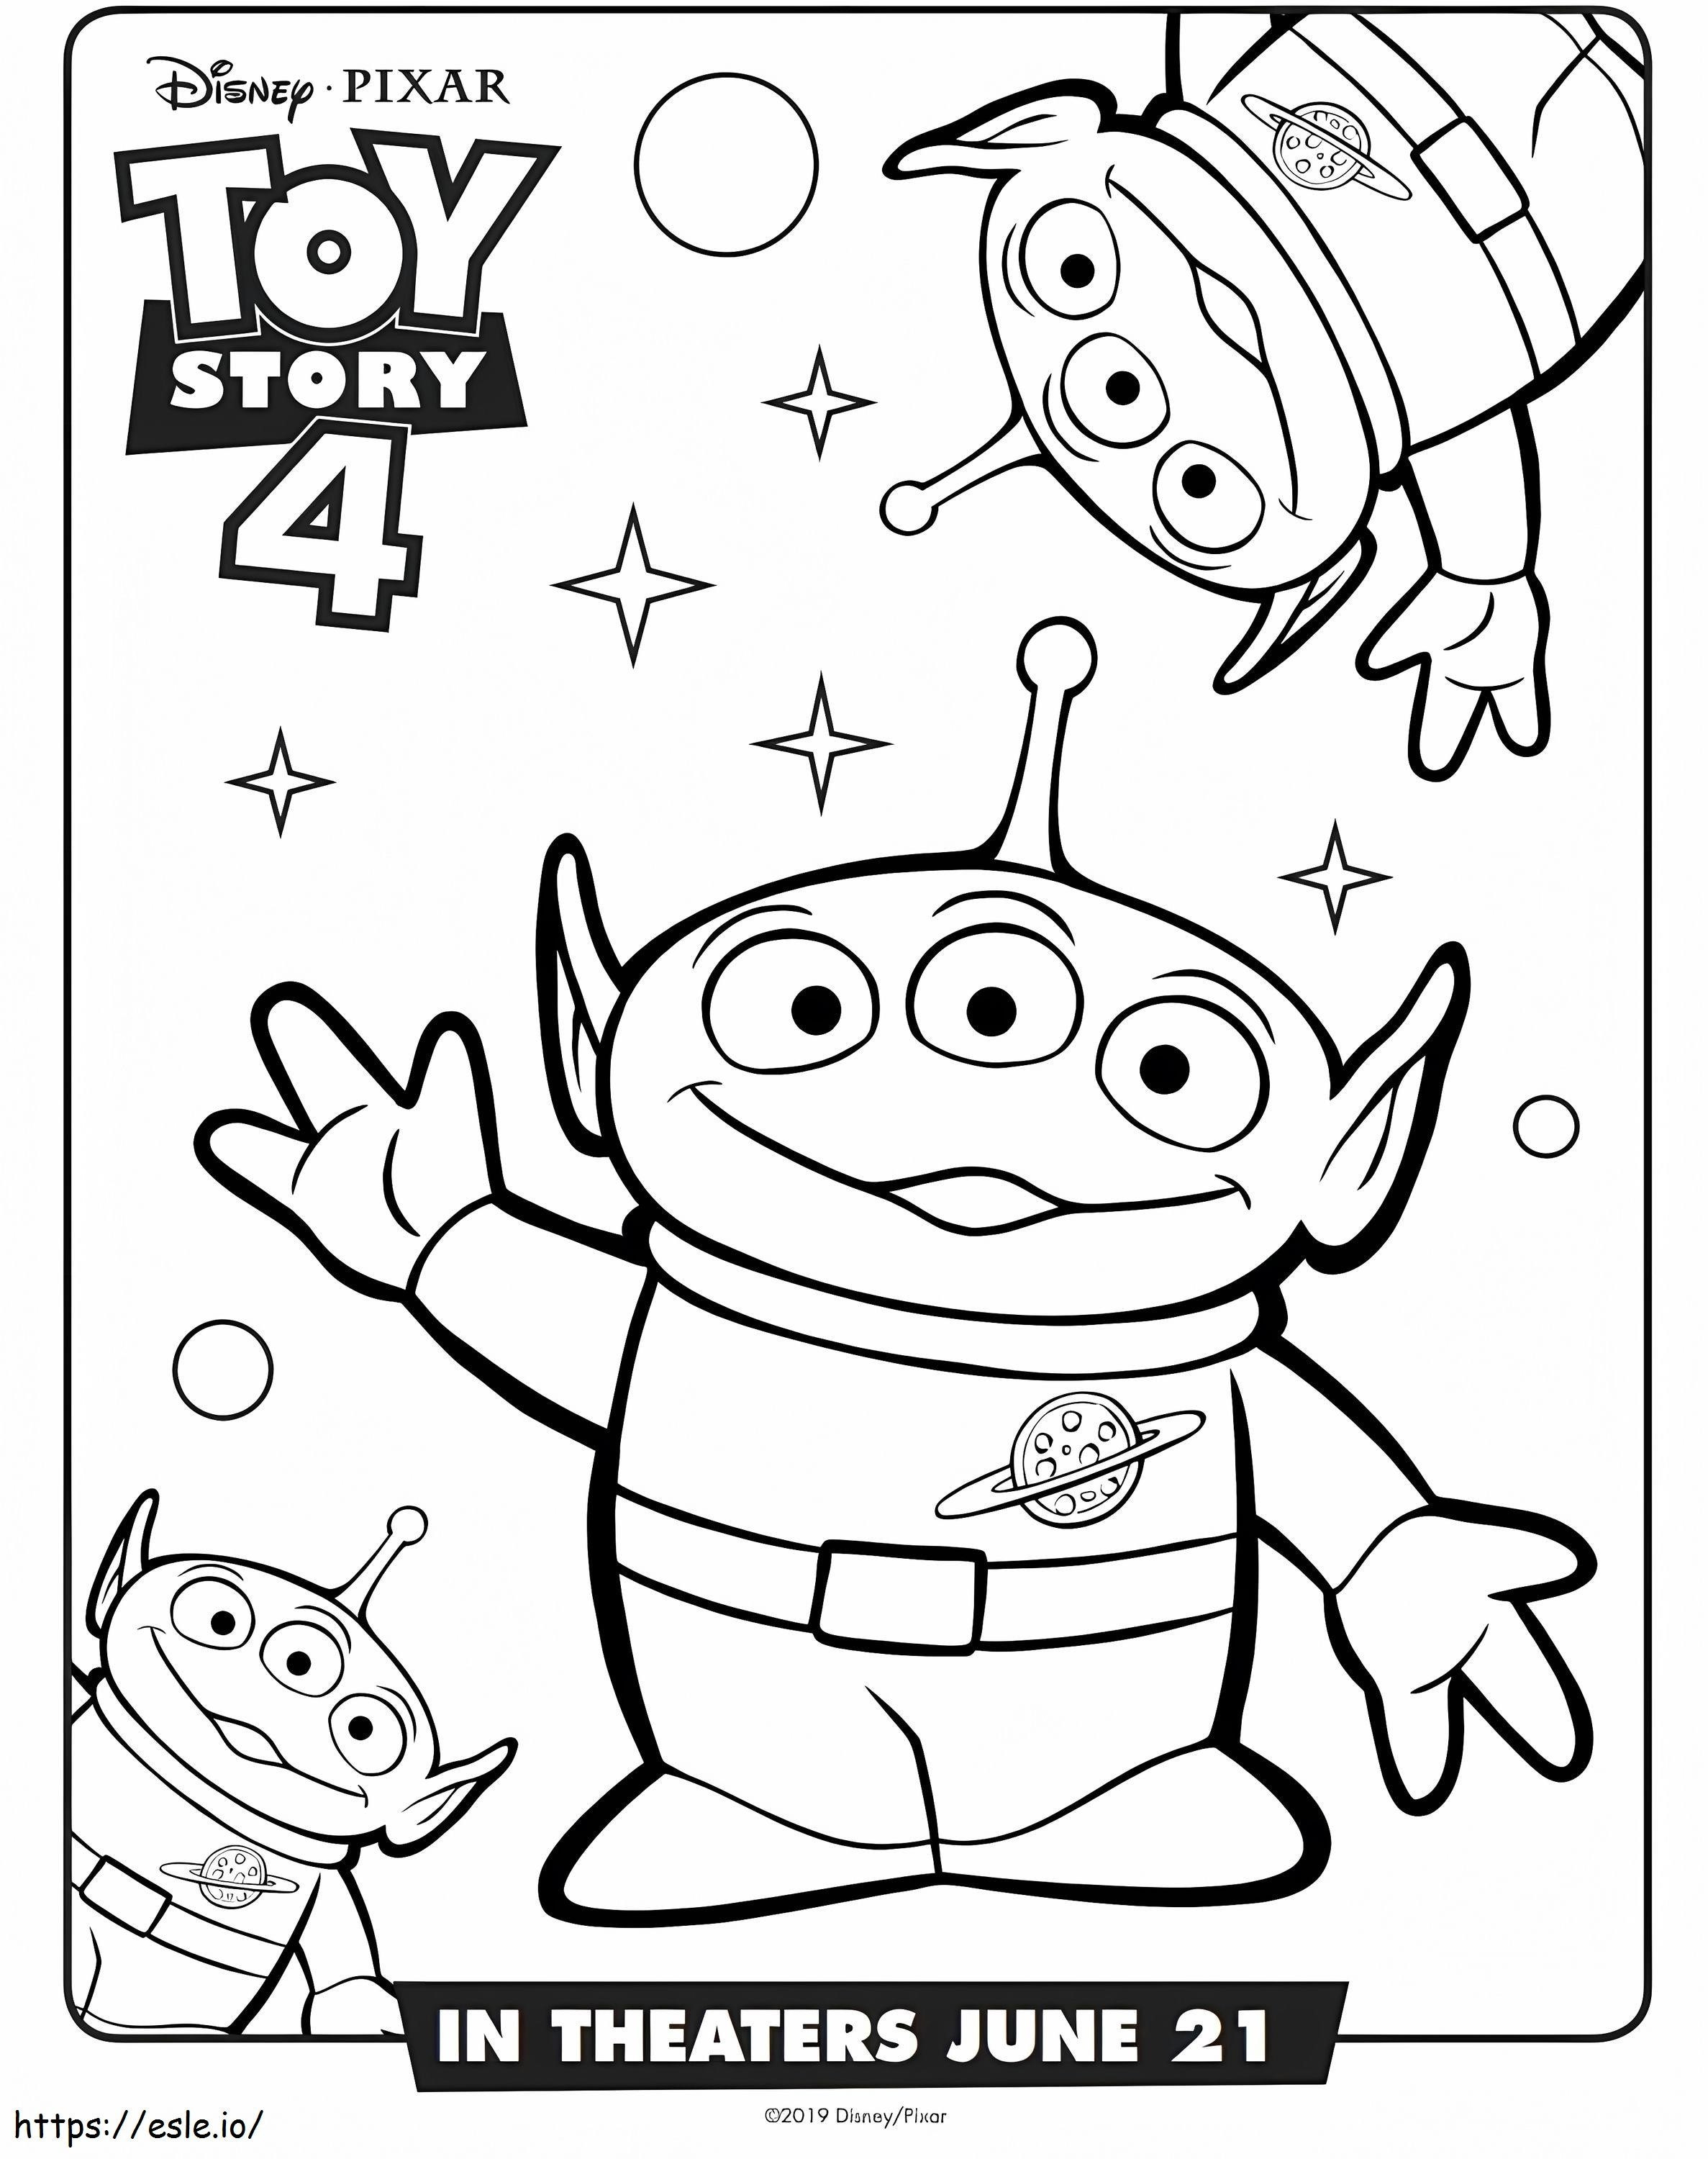  Aliens Toy Story 4 A4 para colorir